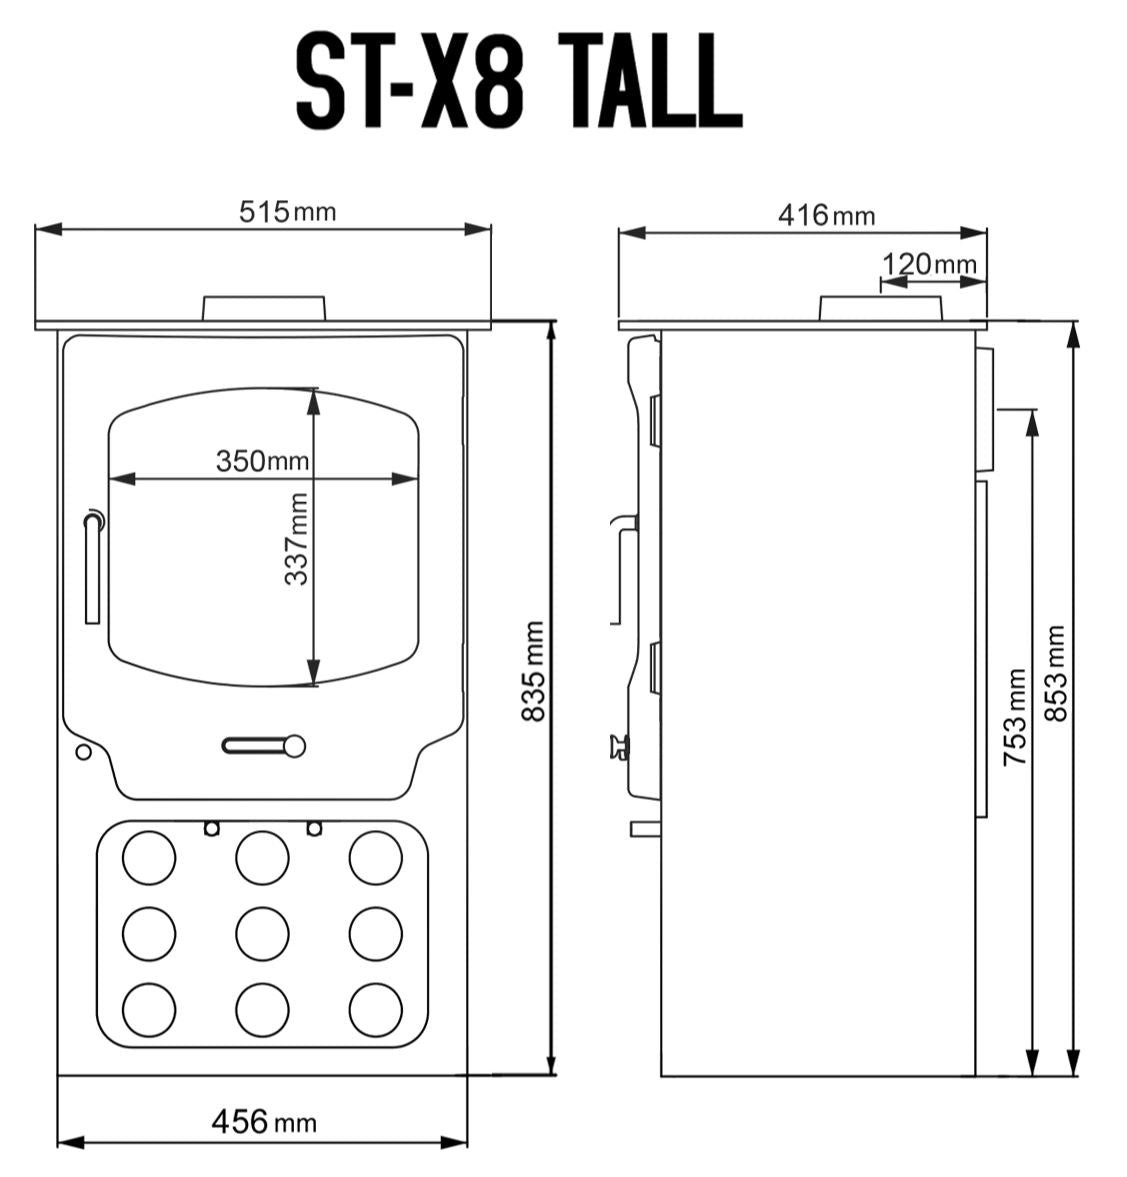 Dimensions and specifications for the ST-X8 Tall